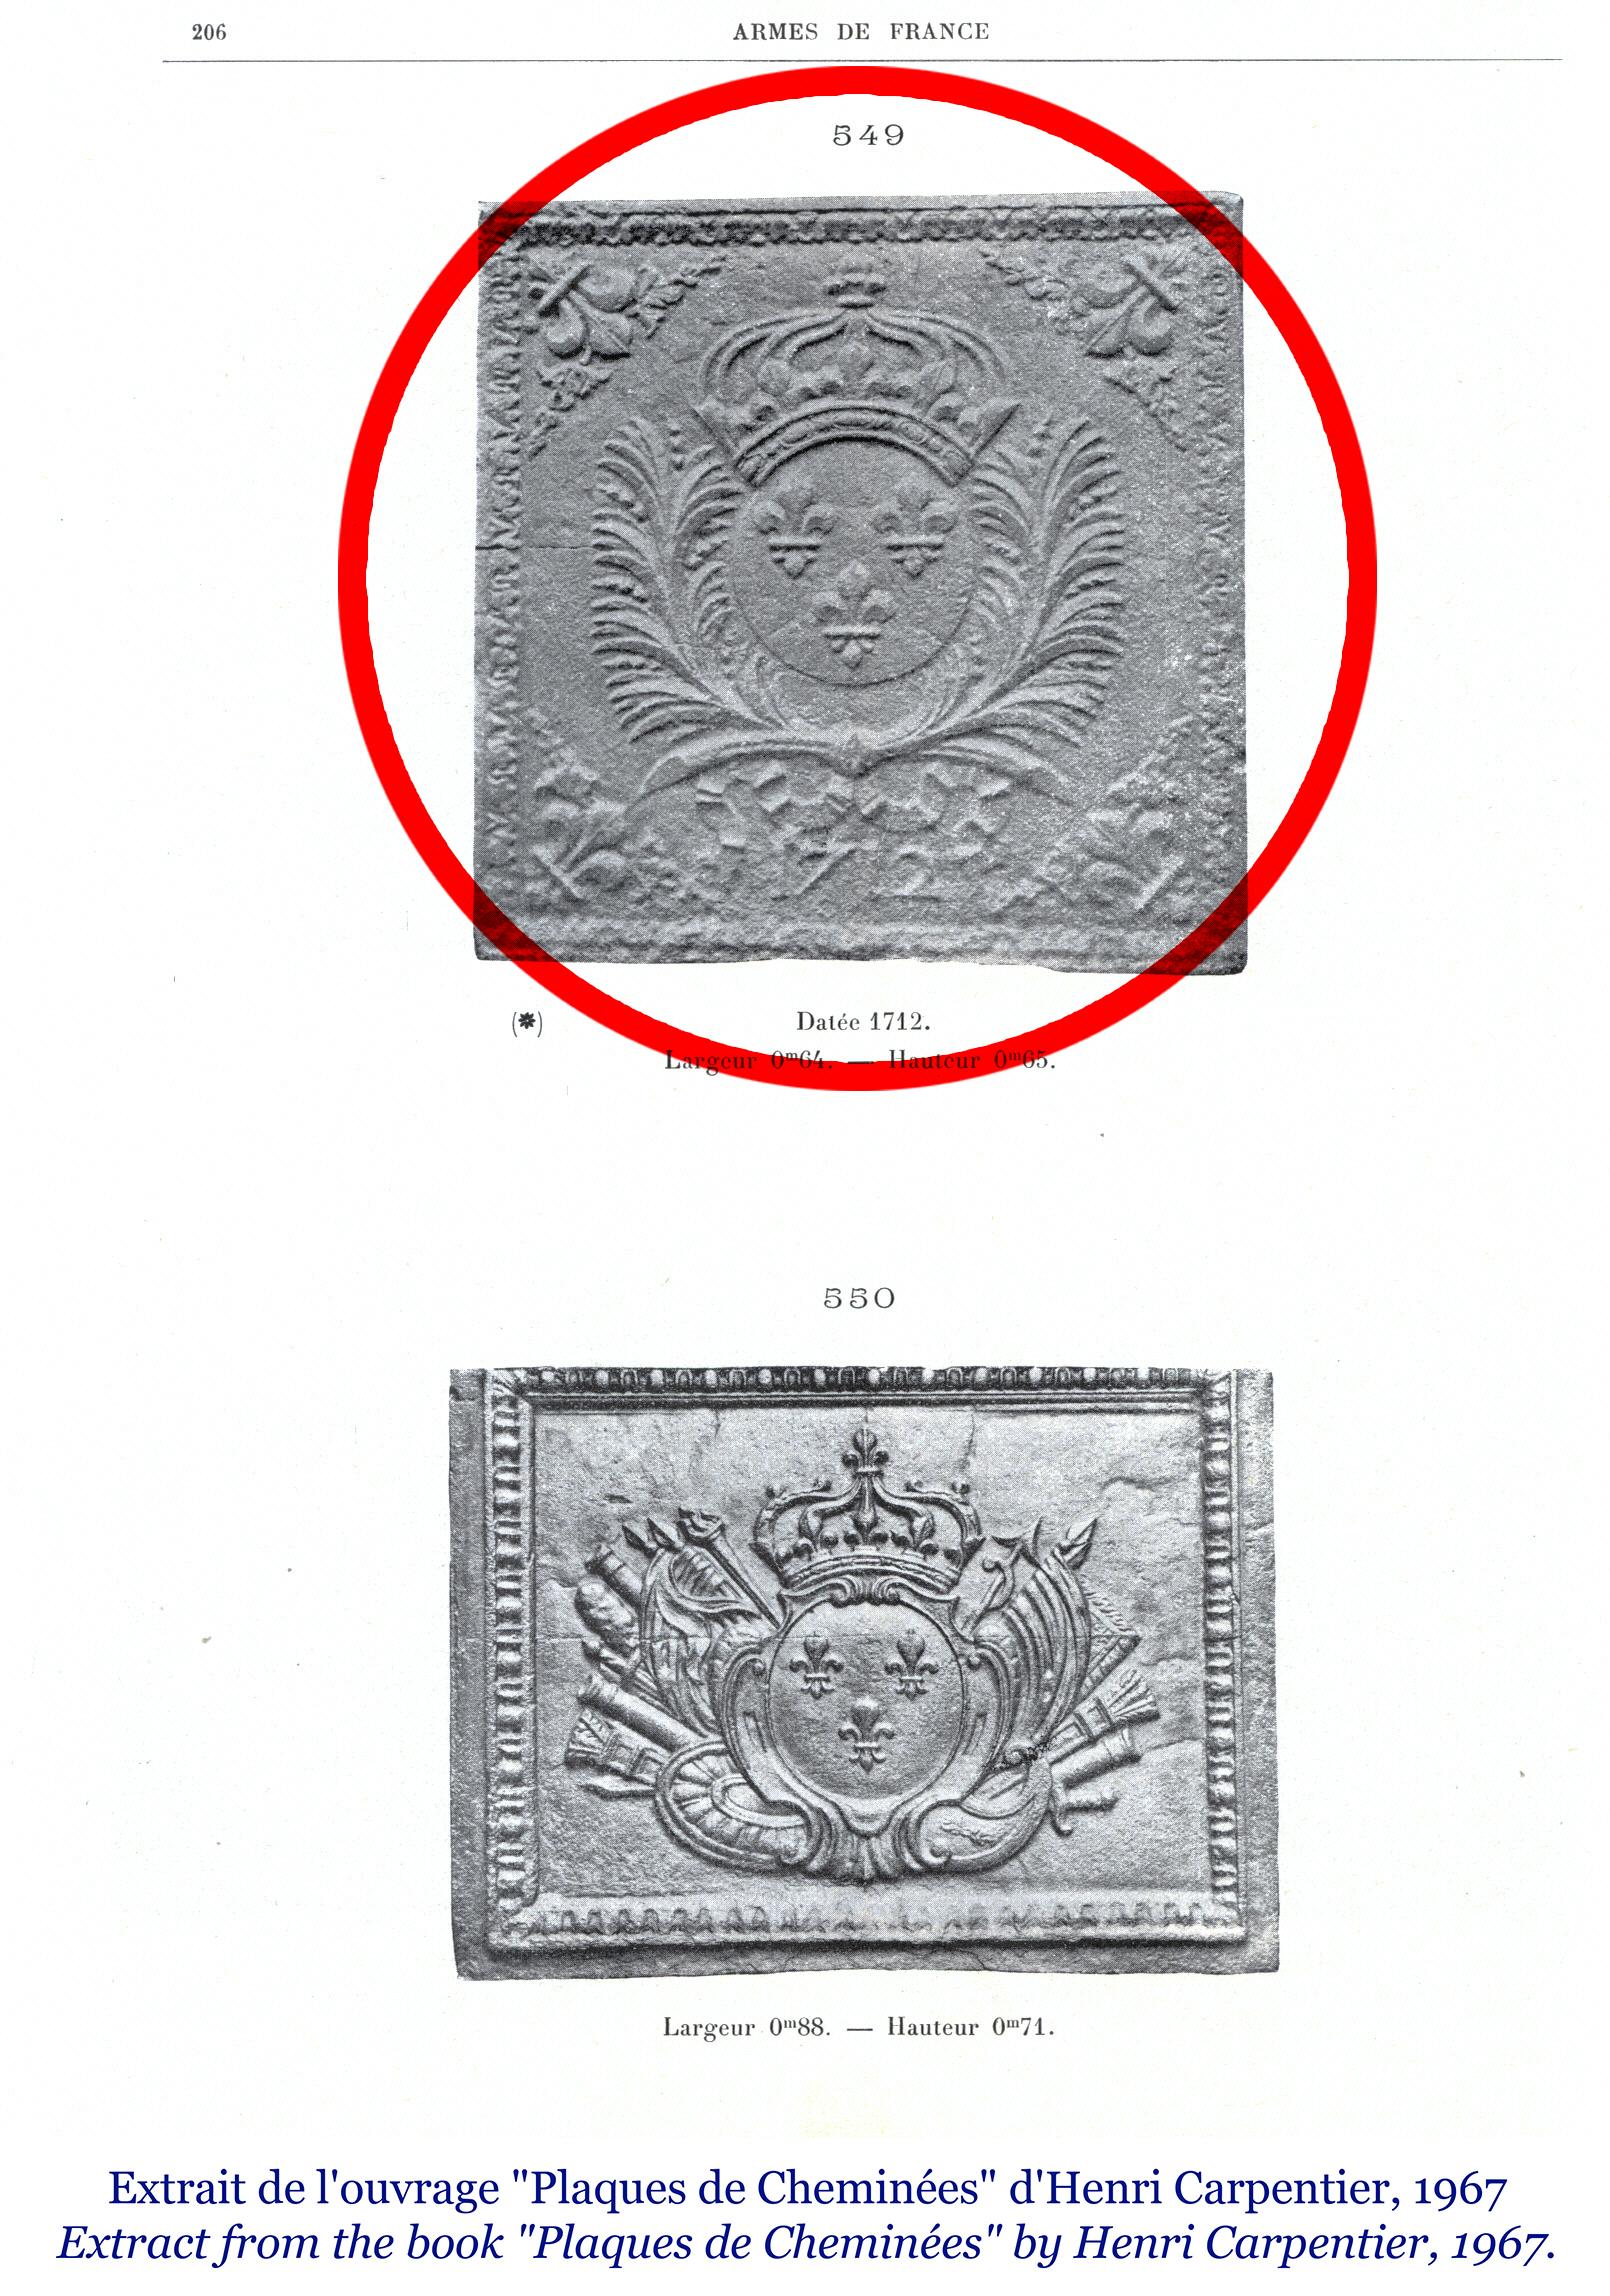 Fireback with the coat of arms of France from the 18th century reproduced in the book 